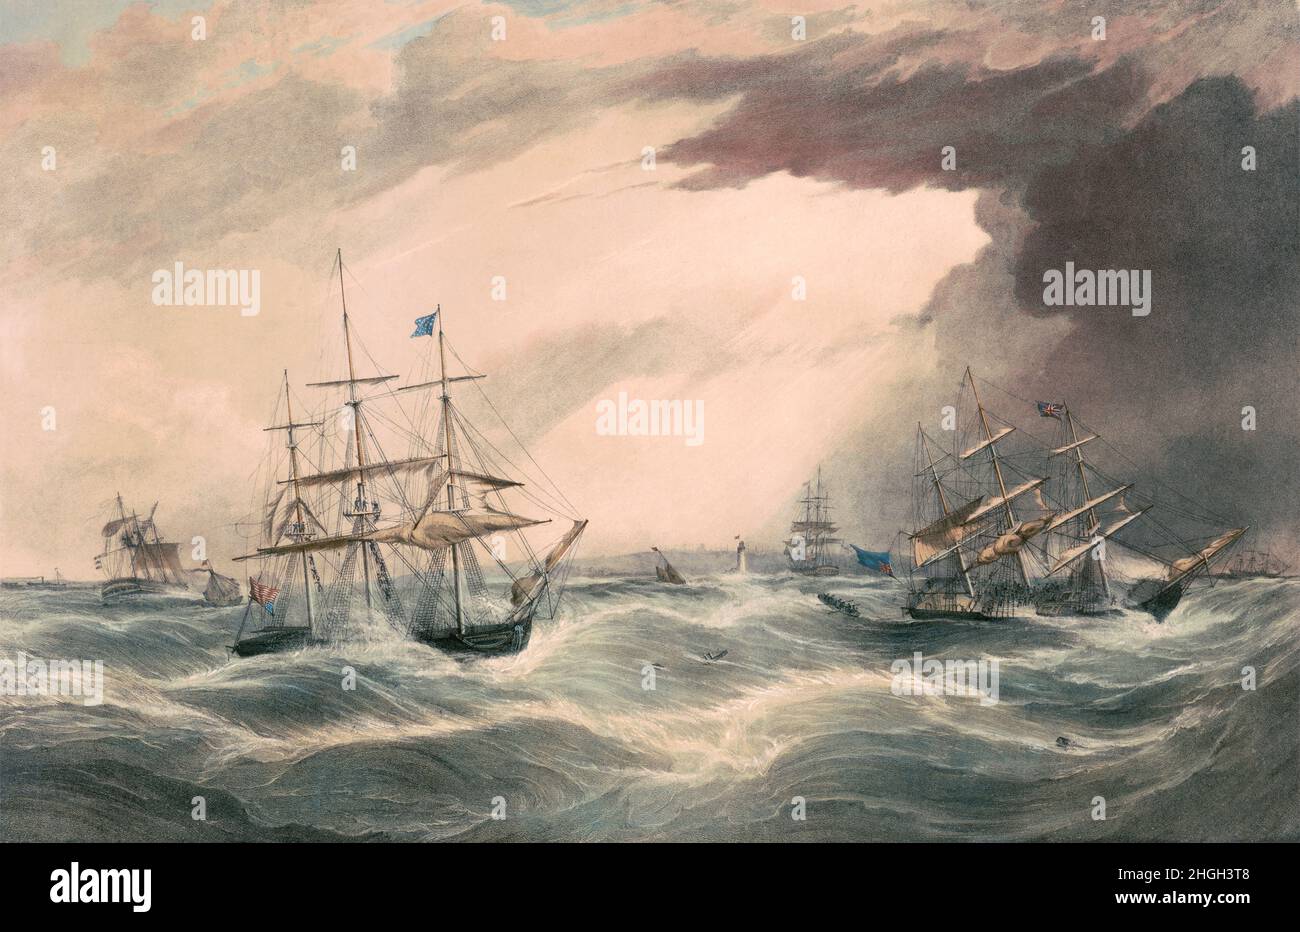 A 19th century  artist's impression of the loss of the New York Packet Ship, 'Pennsylvania' (front left) and the 'Lockwood' Emigrant ship (front right) during a hurricane of January 7th and 8th, 1839 which resulted in the loss of several ships. The event occurred in estuary of the River Mersey, Liverpool, England  and Leasowe Lighthouse and Bidston Hill can be seen in the centre backgound. Stock Photo